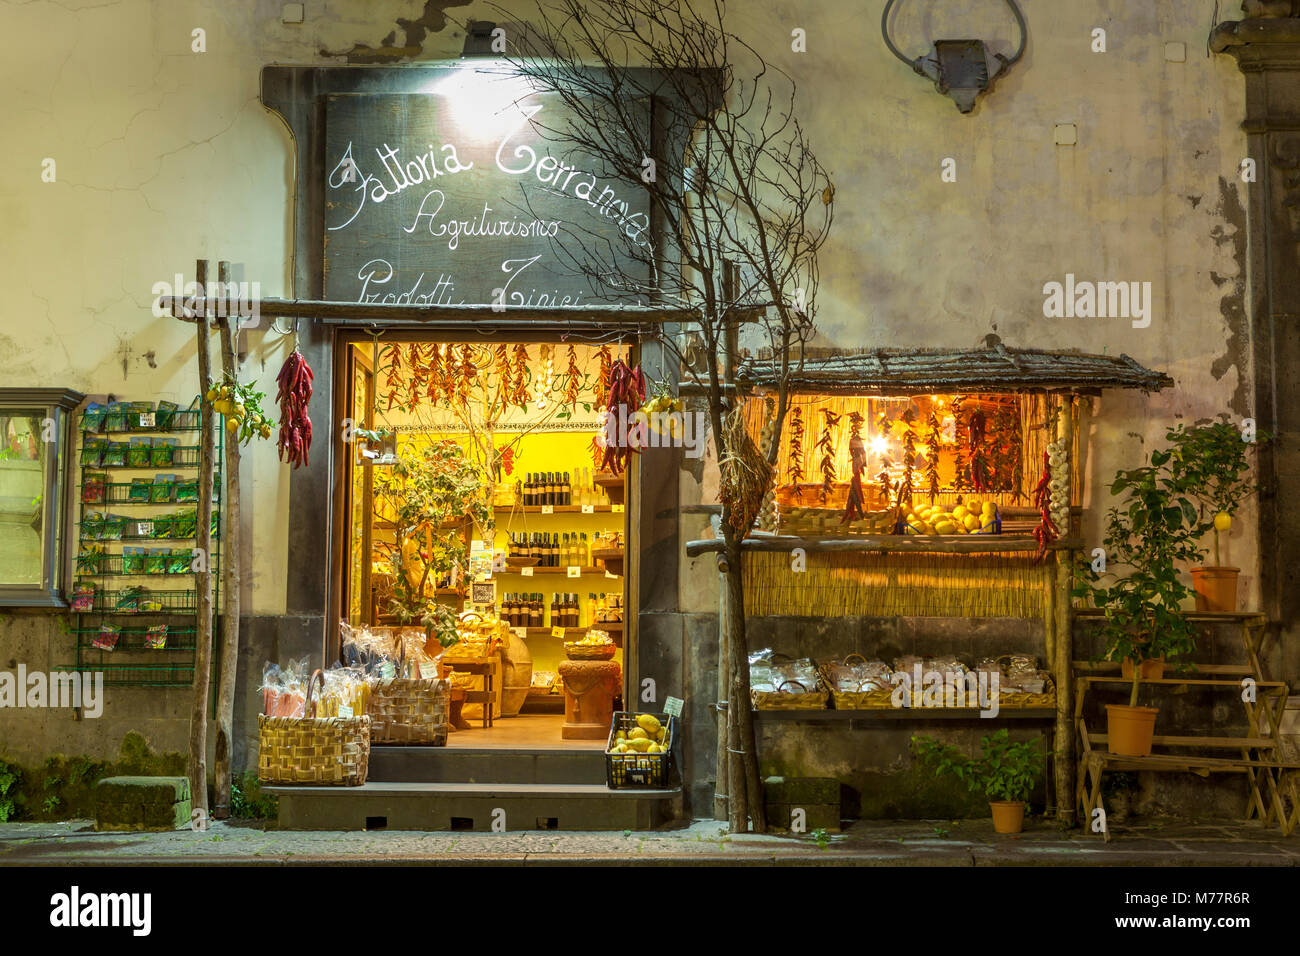 Shop lit up selling produce at night in the back streets of Sorrento, Campania, Italy, Europe Stock Photo